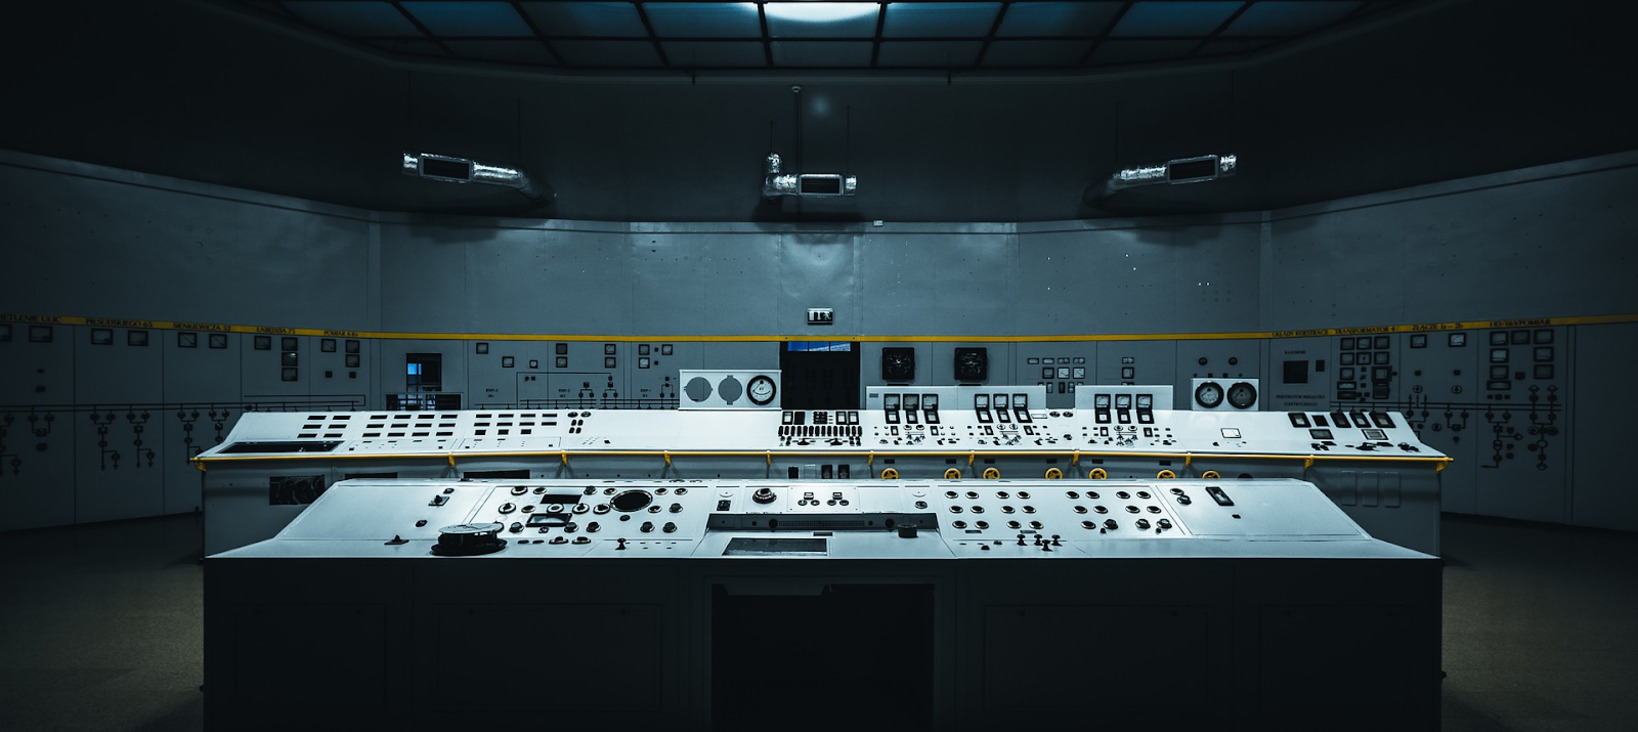 A photo of a large, windowless, dark room with a long control console with numerous dials and switches and displays. The room appears to be a control room or a space for monitoring and operating a large production system.